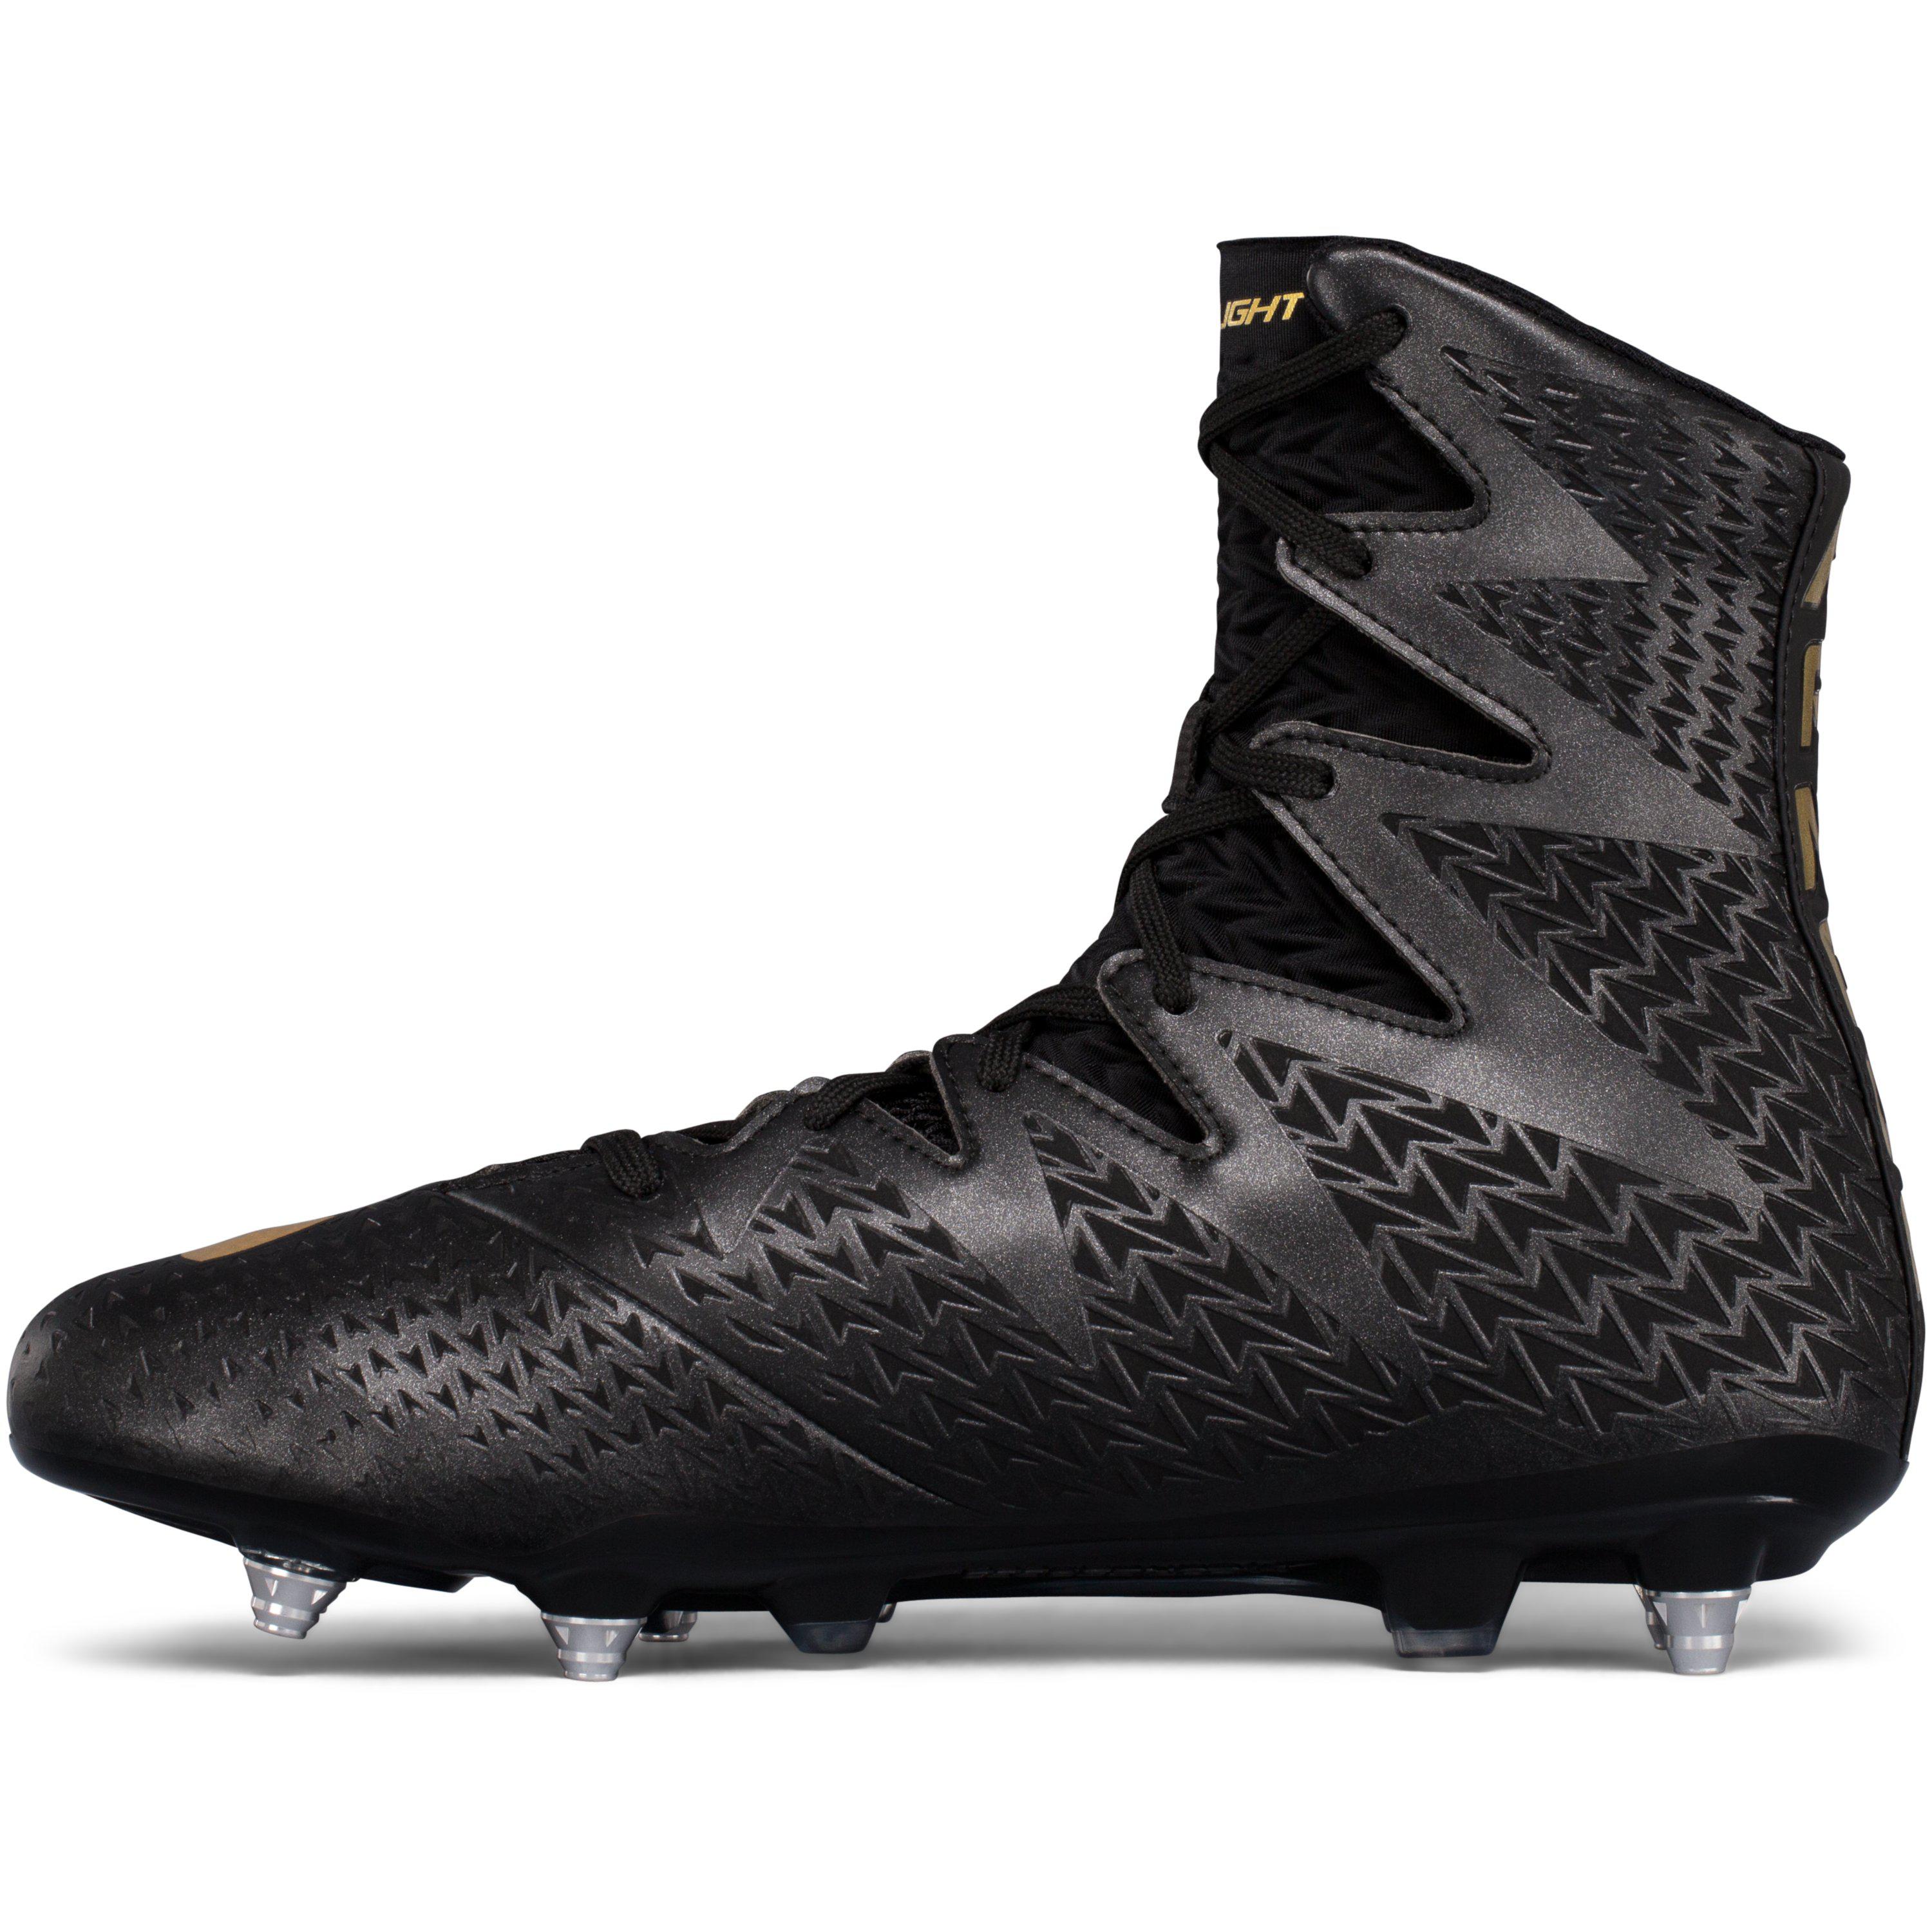 Under Armour Men's Ua Highlight Hybrid Rugby Cleats in Black for